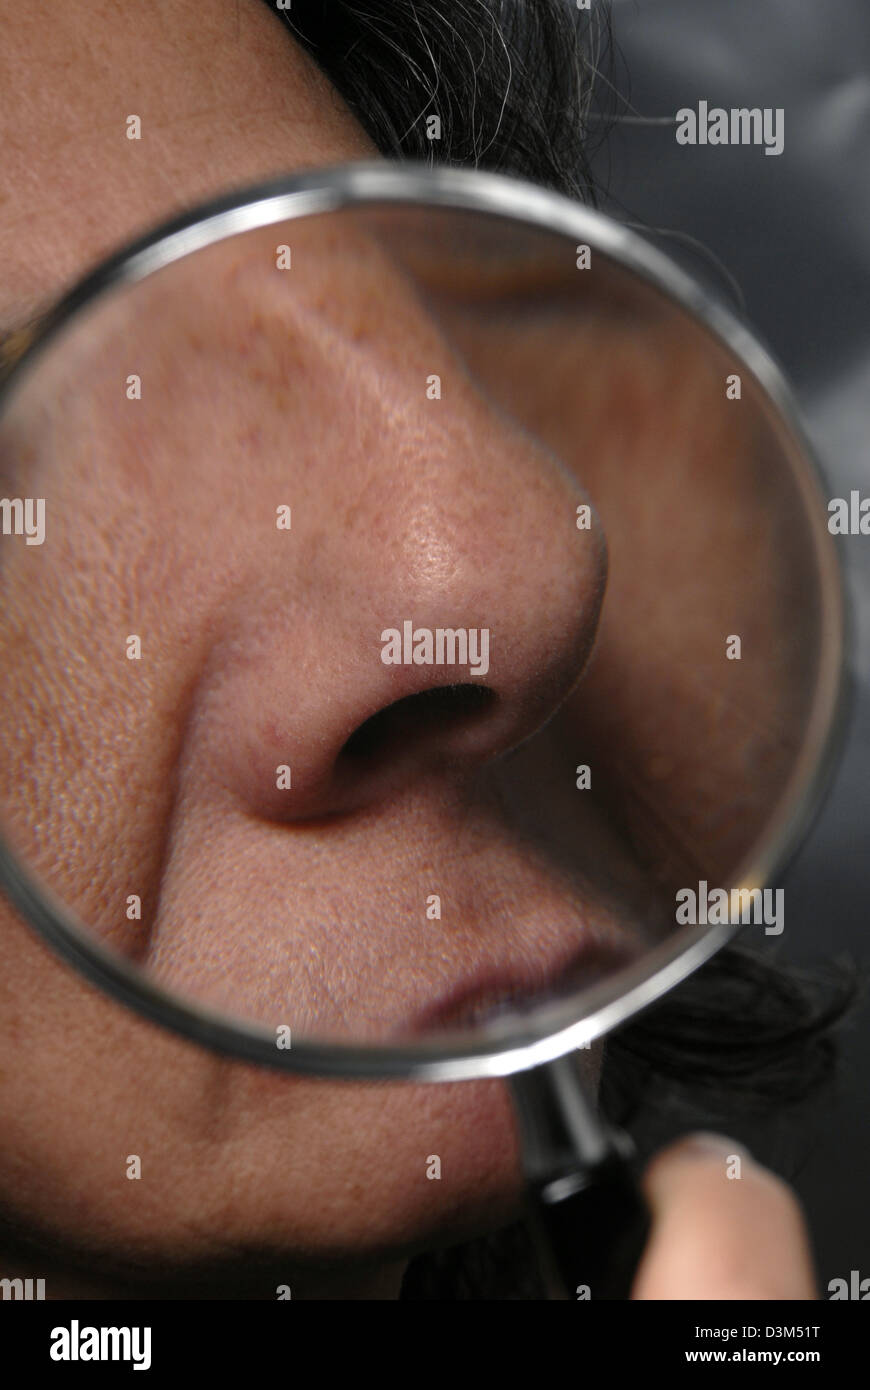 woman nose close up showed with a magnifying glass Stock Photo